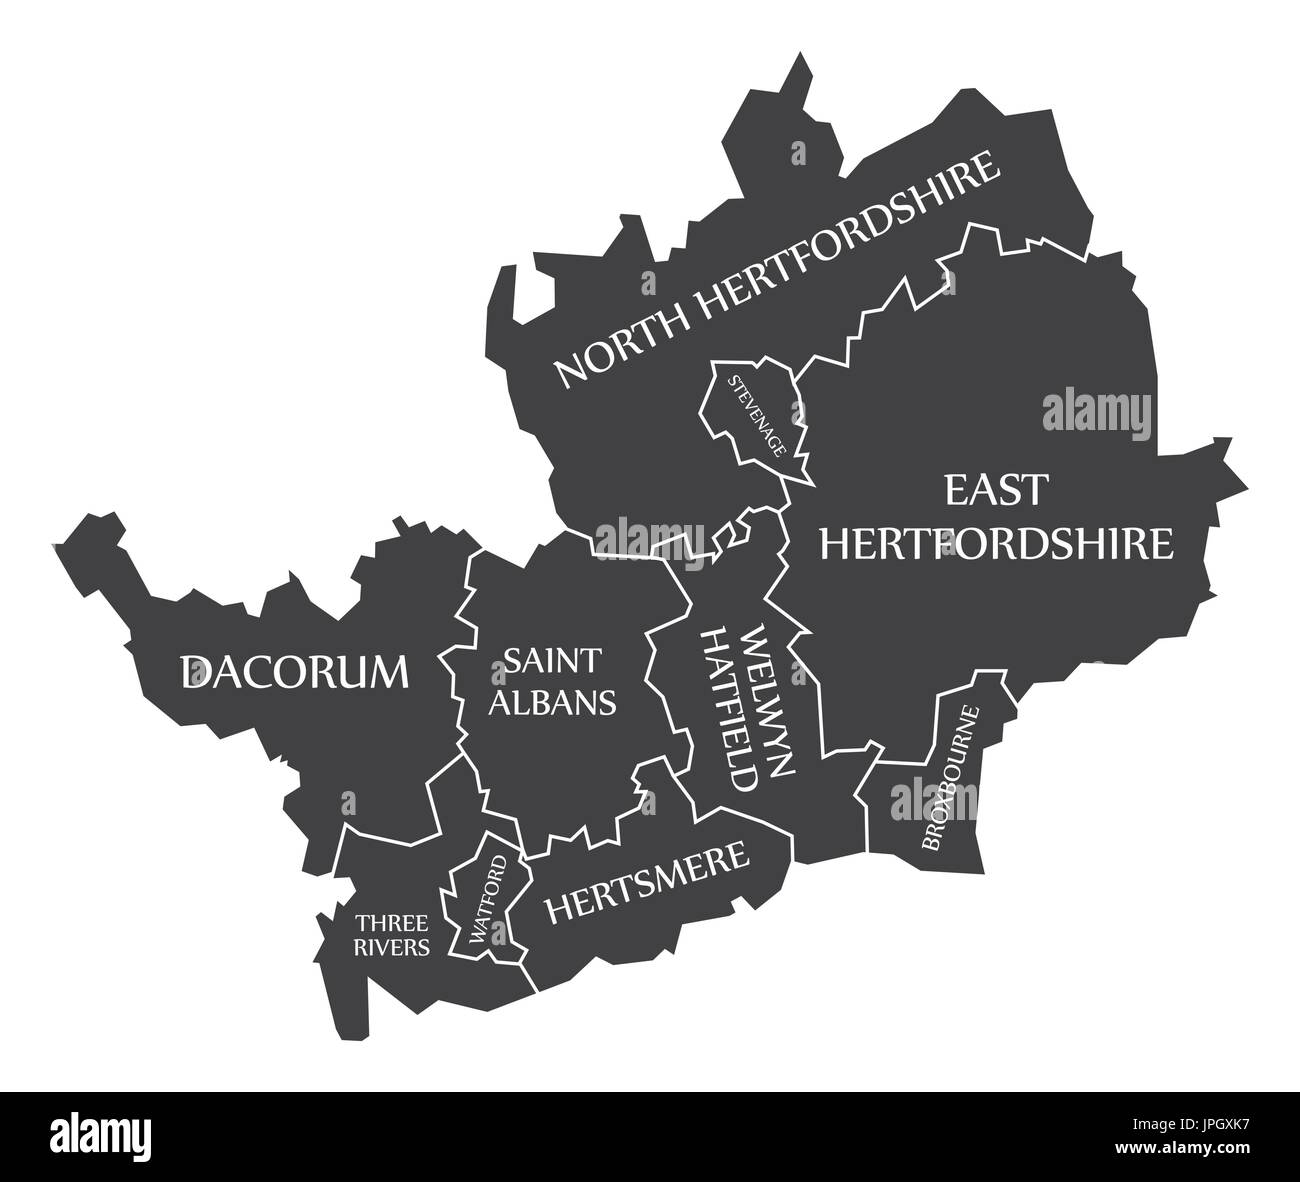 Hertfordshire county England UK black map with white labels illustration Stock Vector